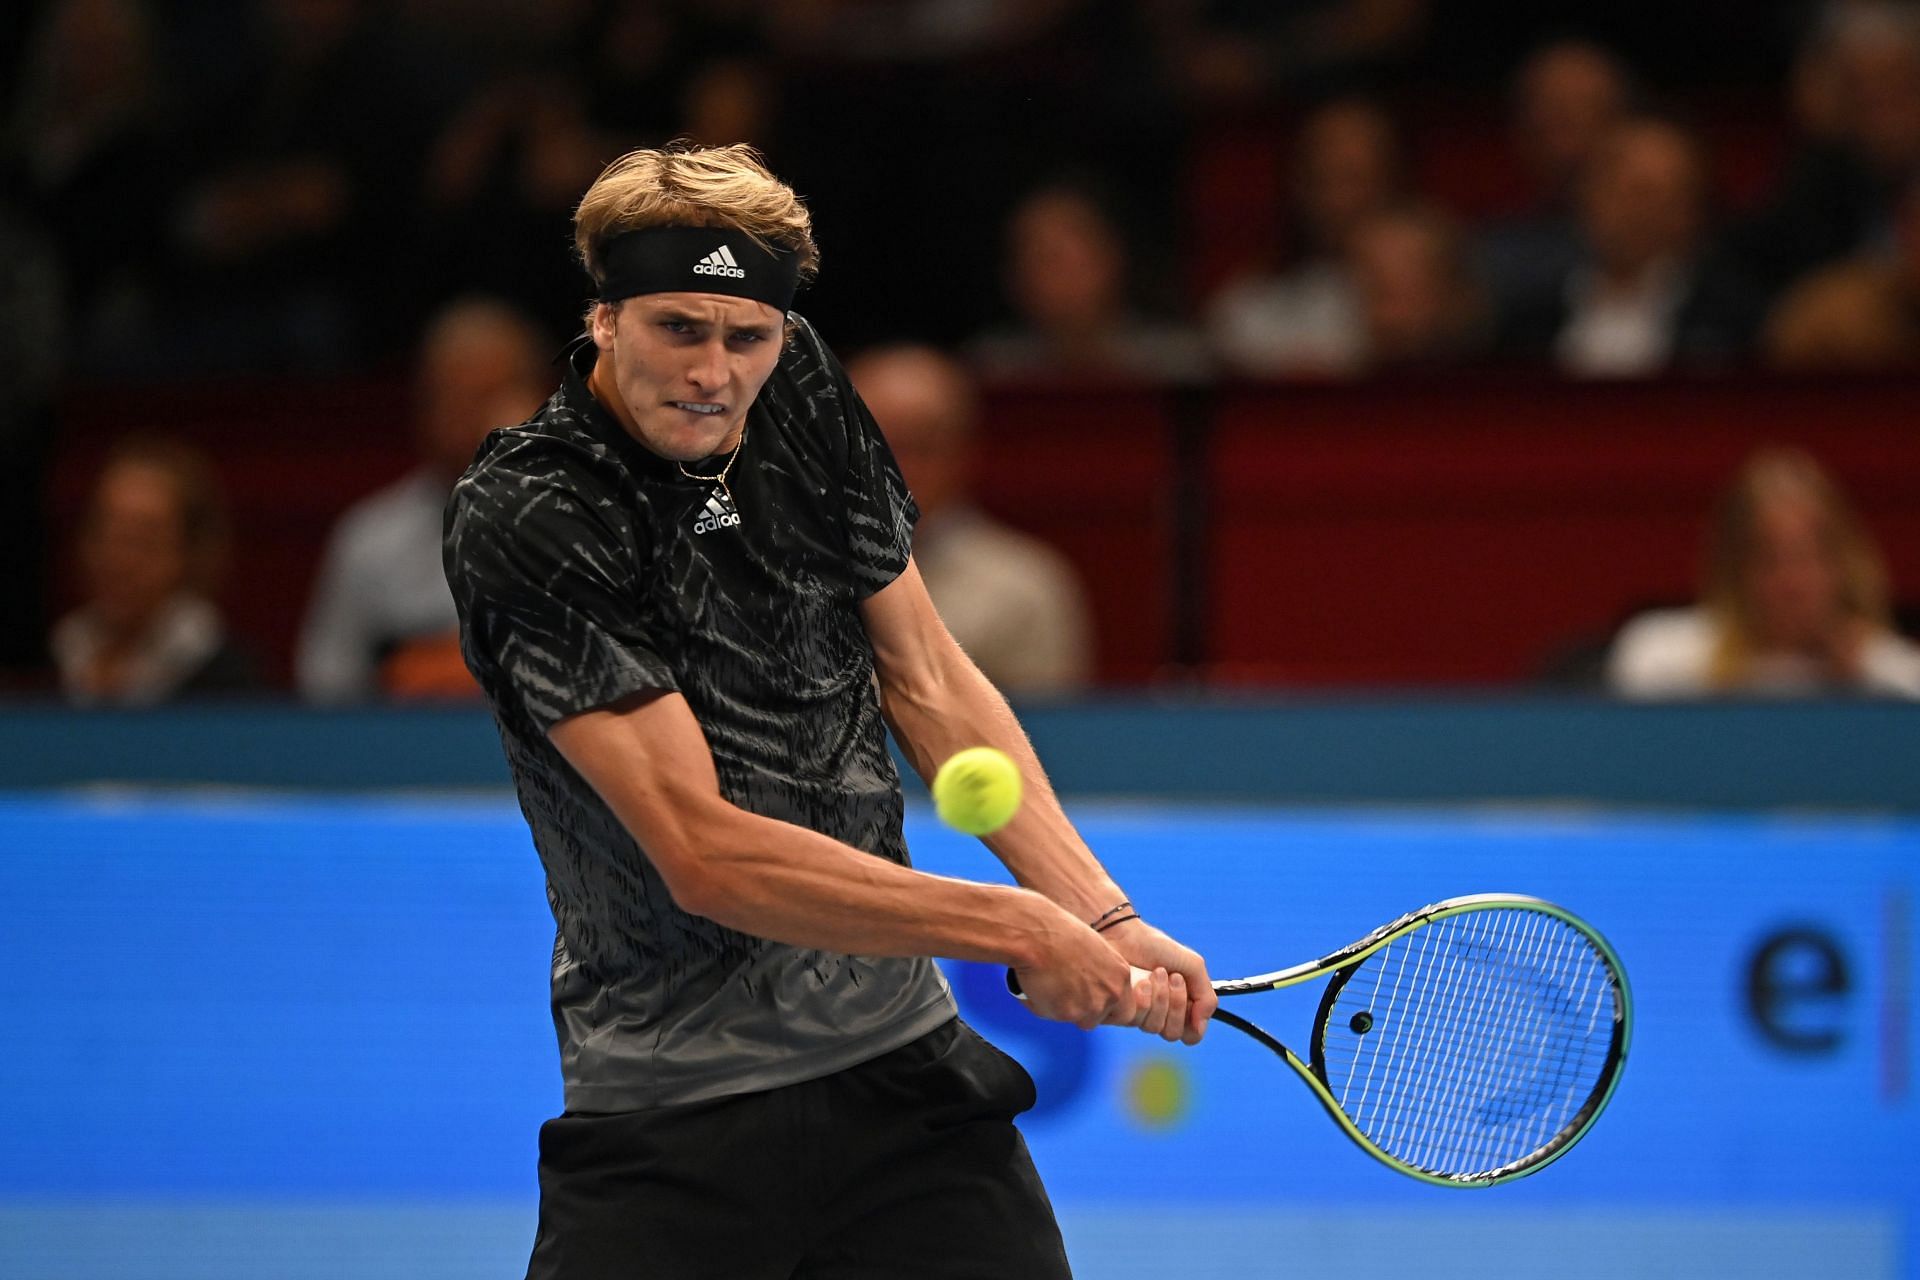 Alexander Zverev in action at the Erste Bank Open on Tuesday